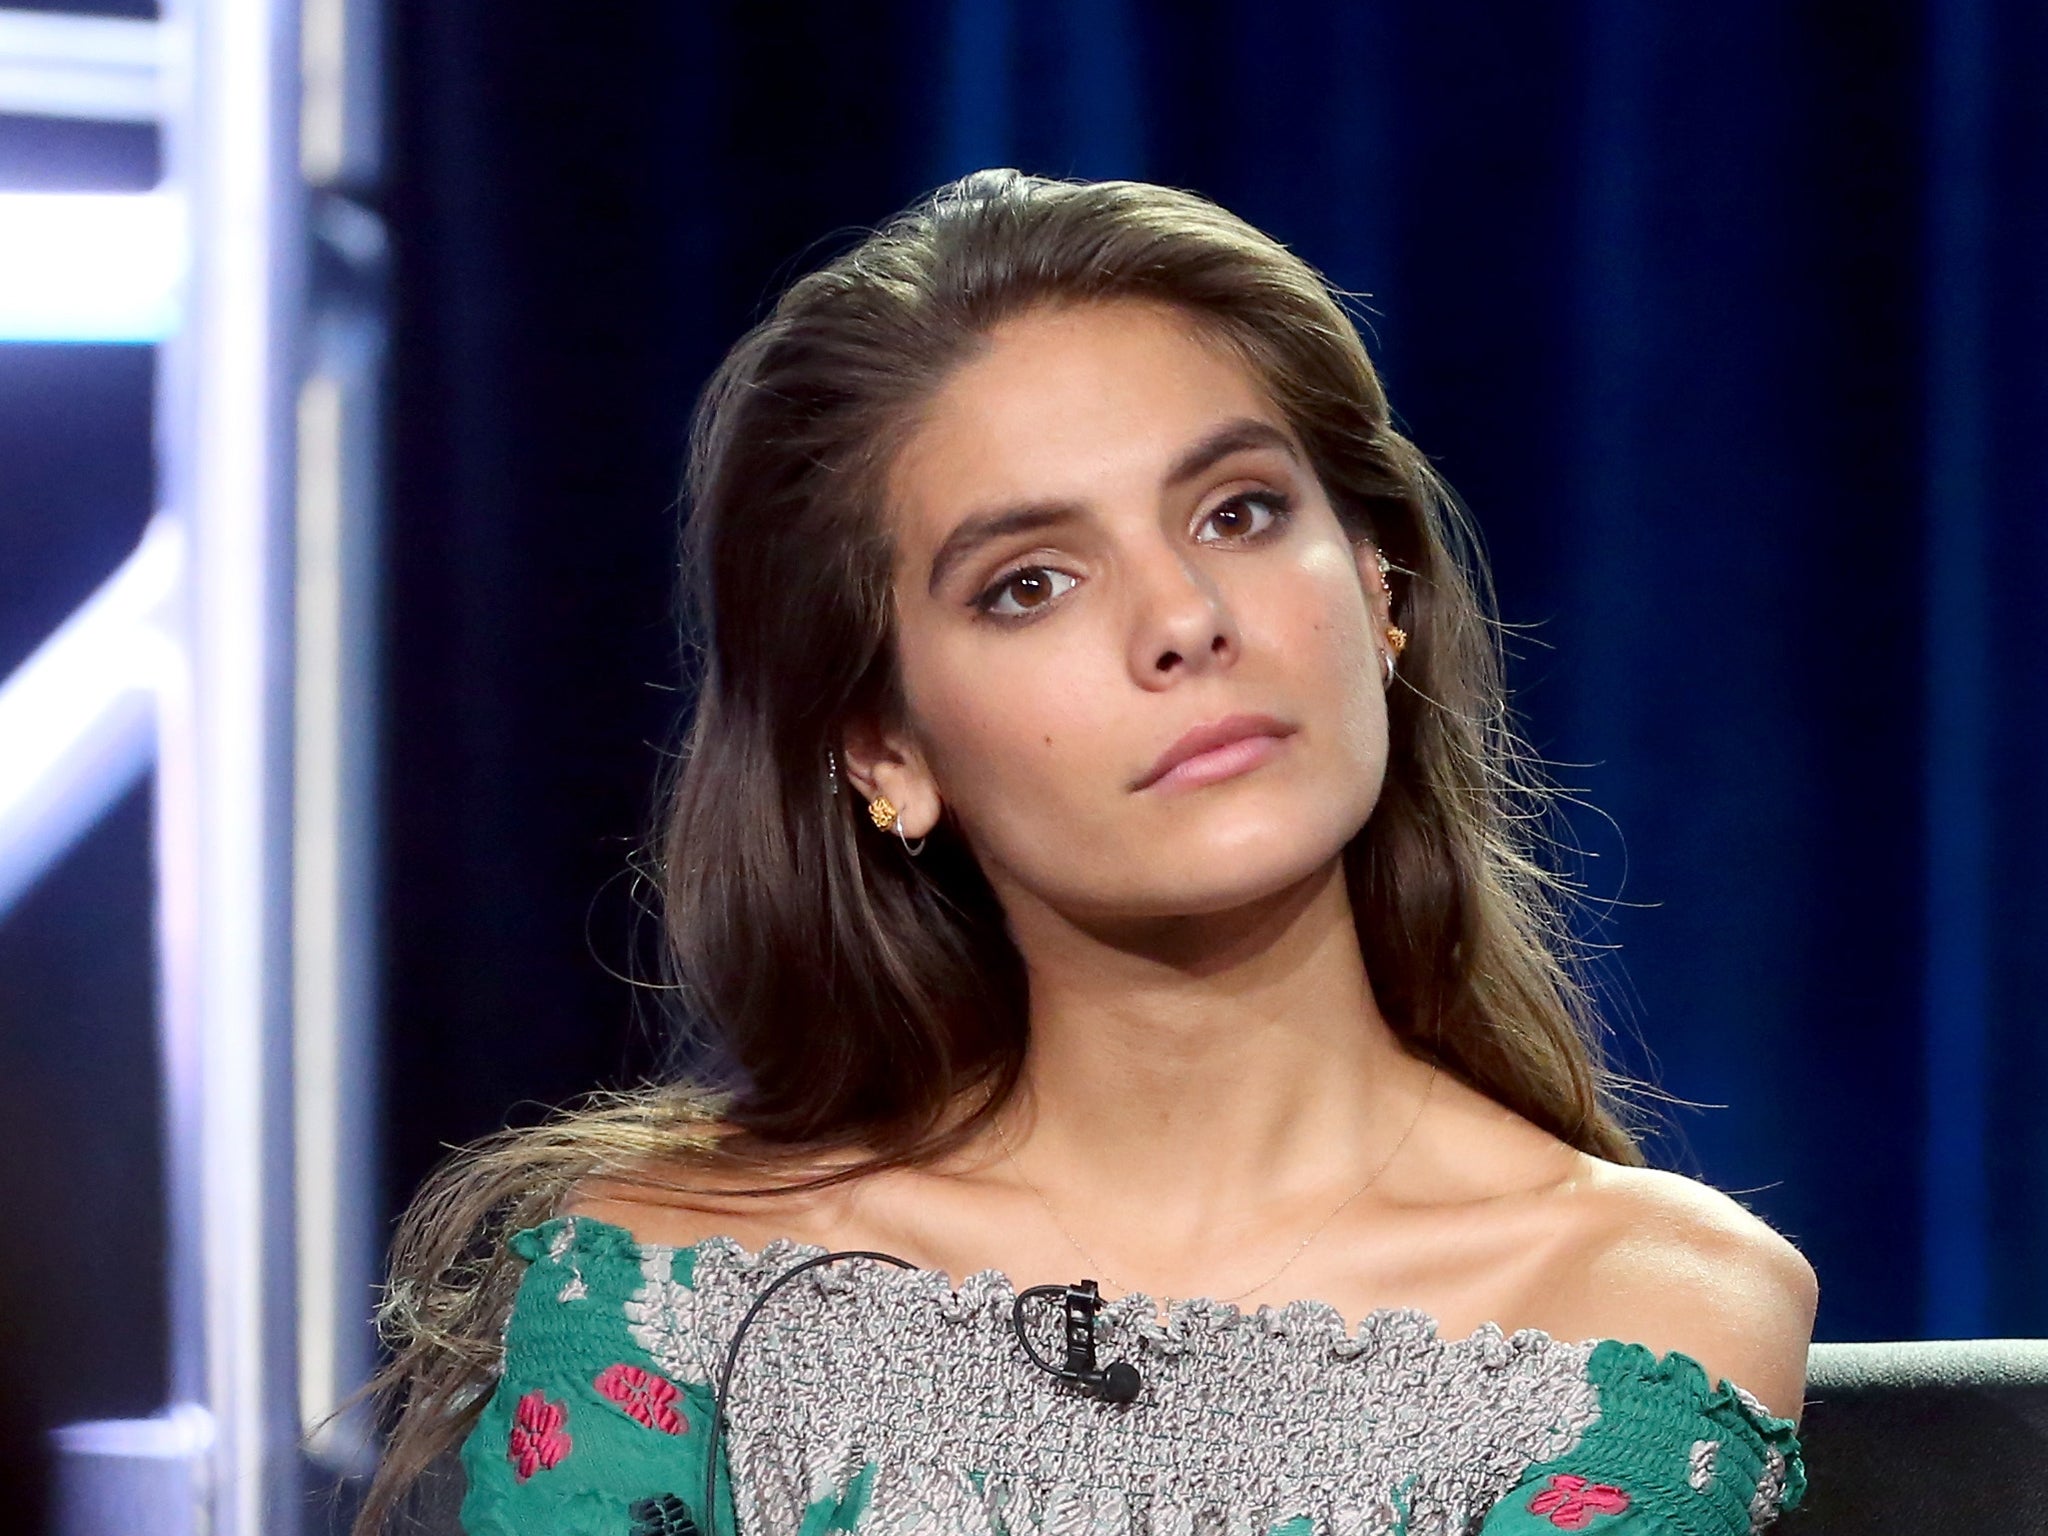 Caitlin Stasey during a 2017 promotional event for the US drama series APB